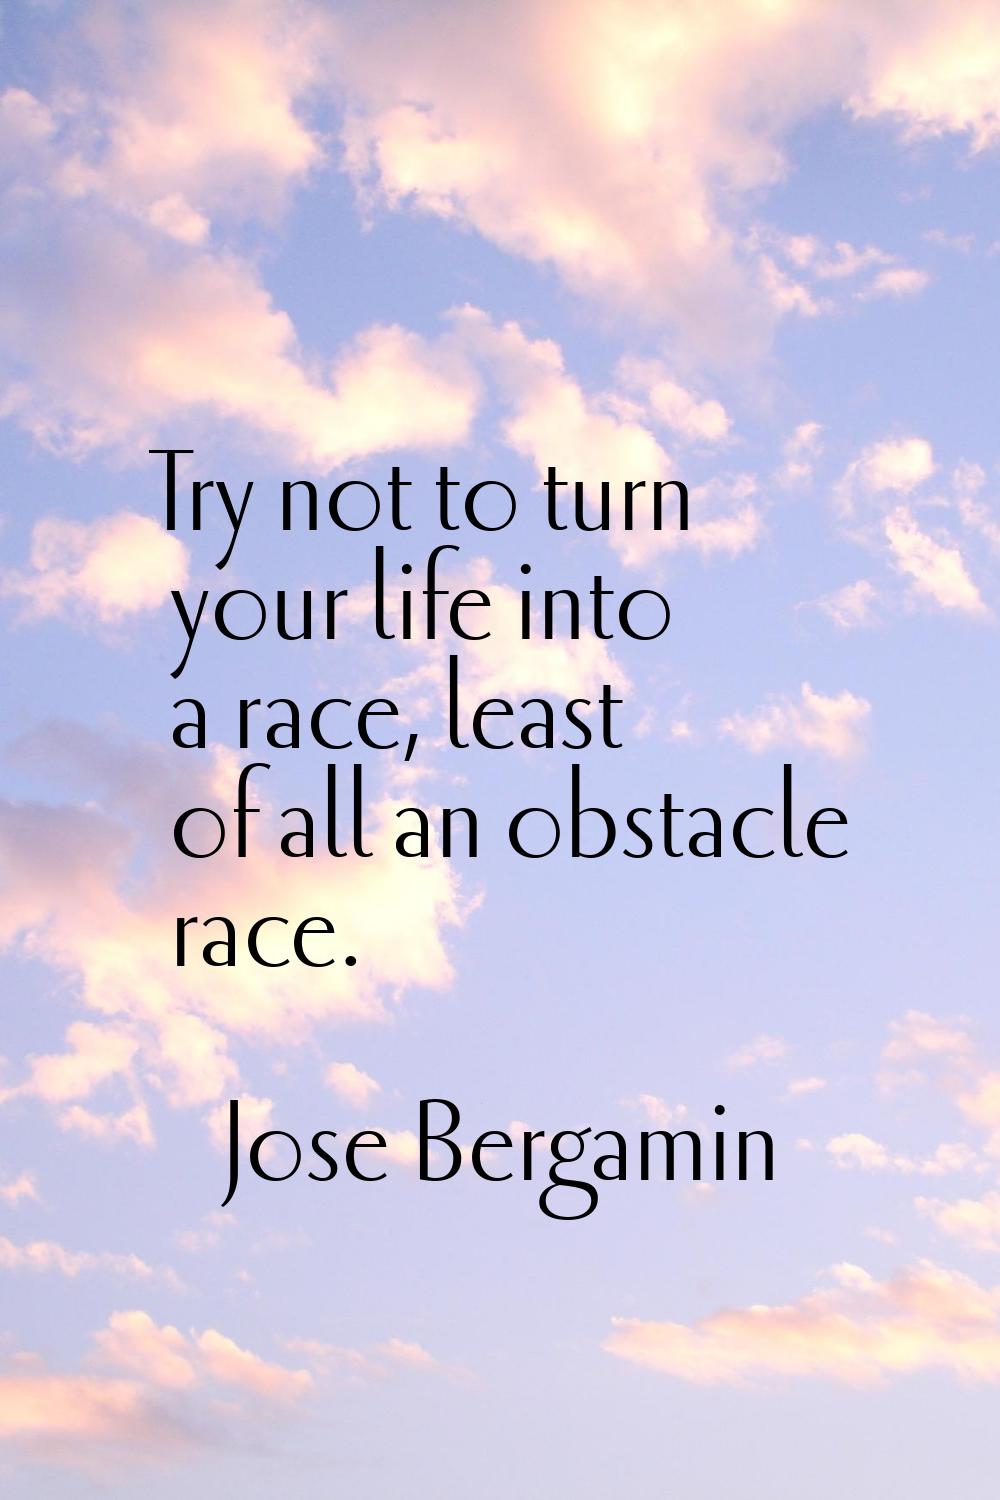 Try not to turn your life into a race, least of all an obstacle race.